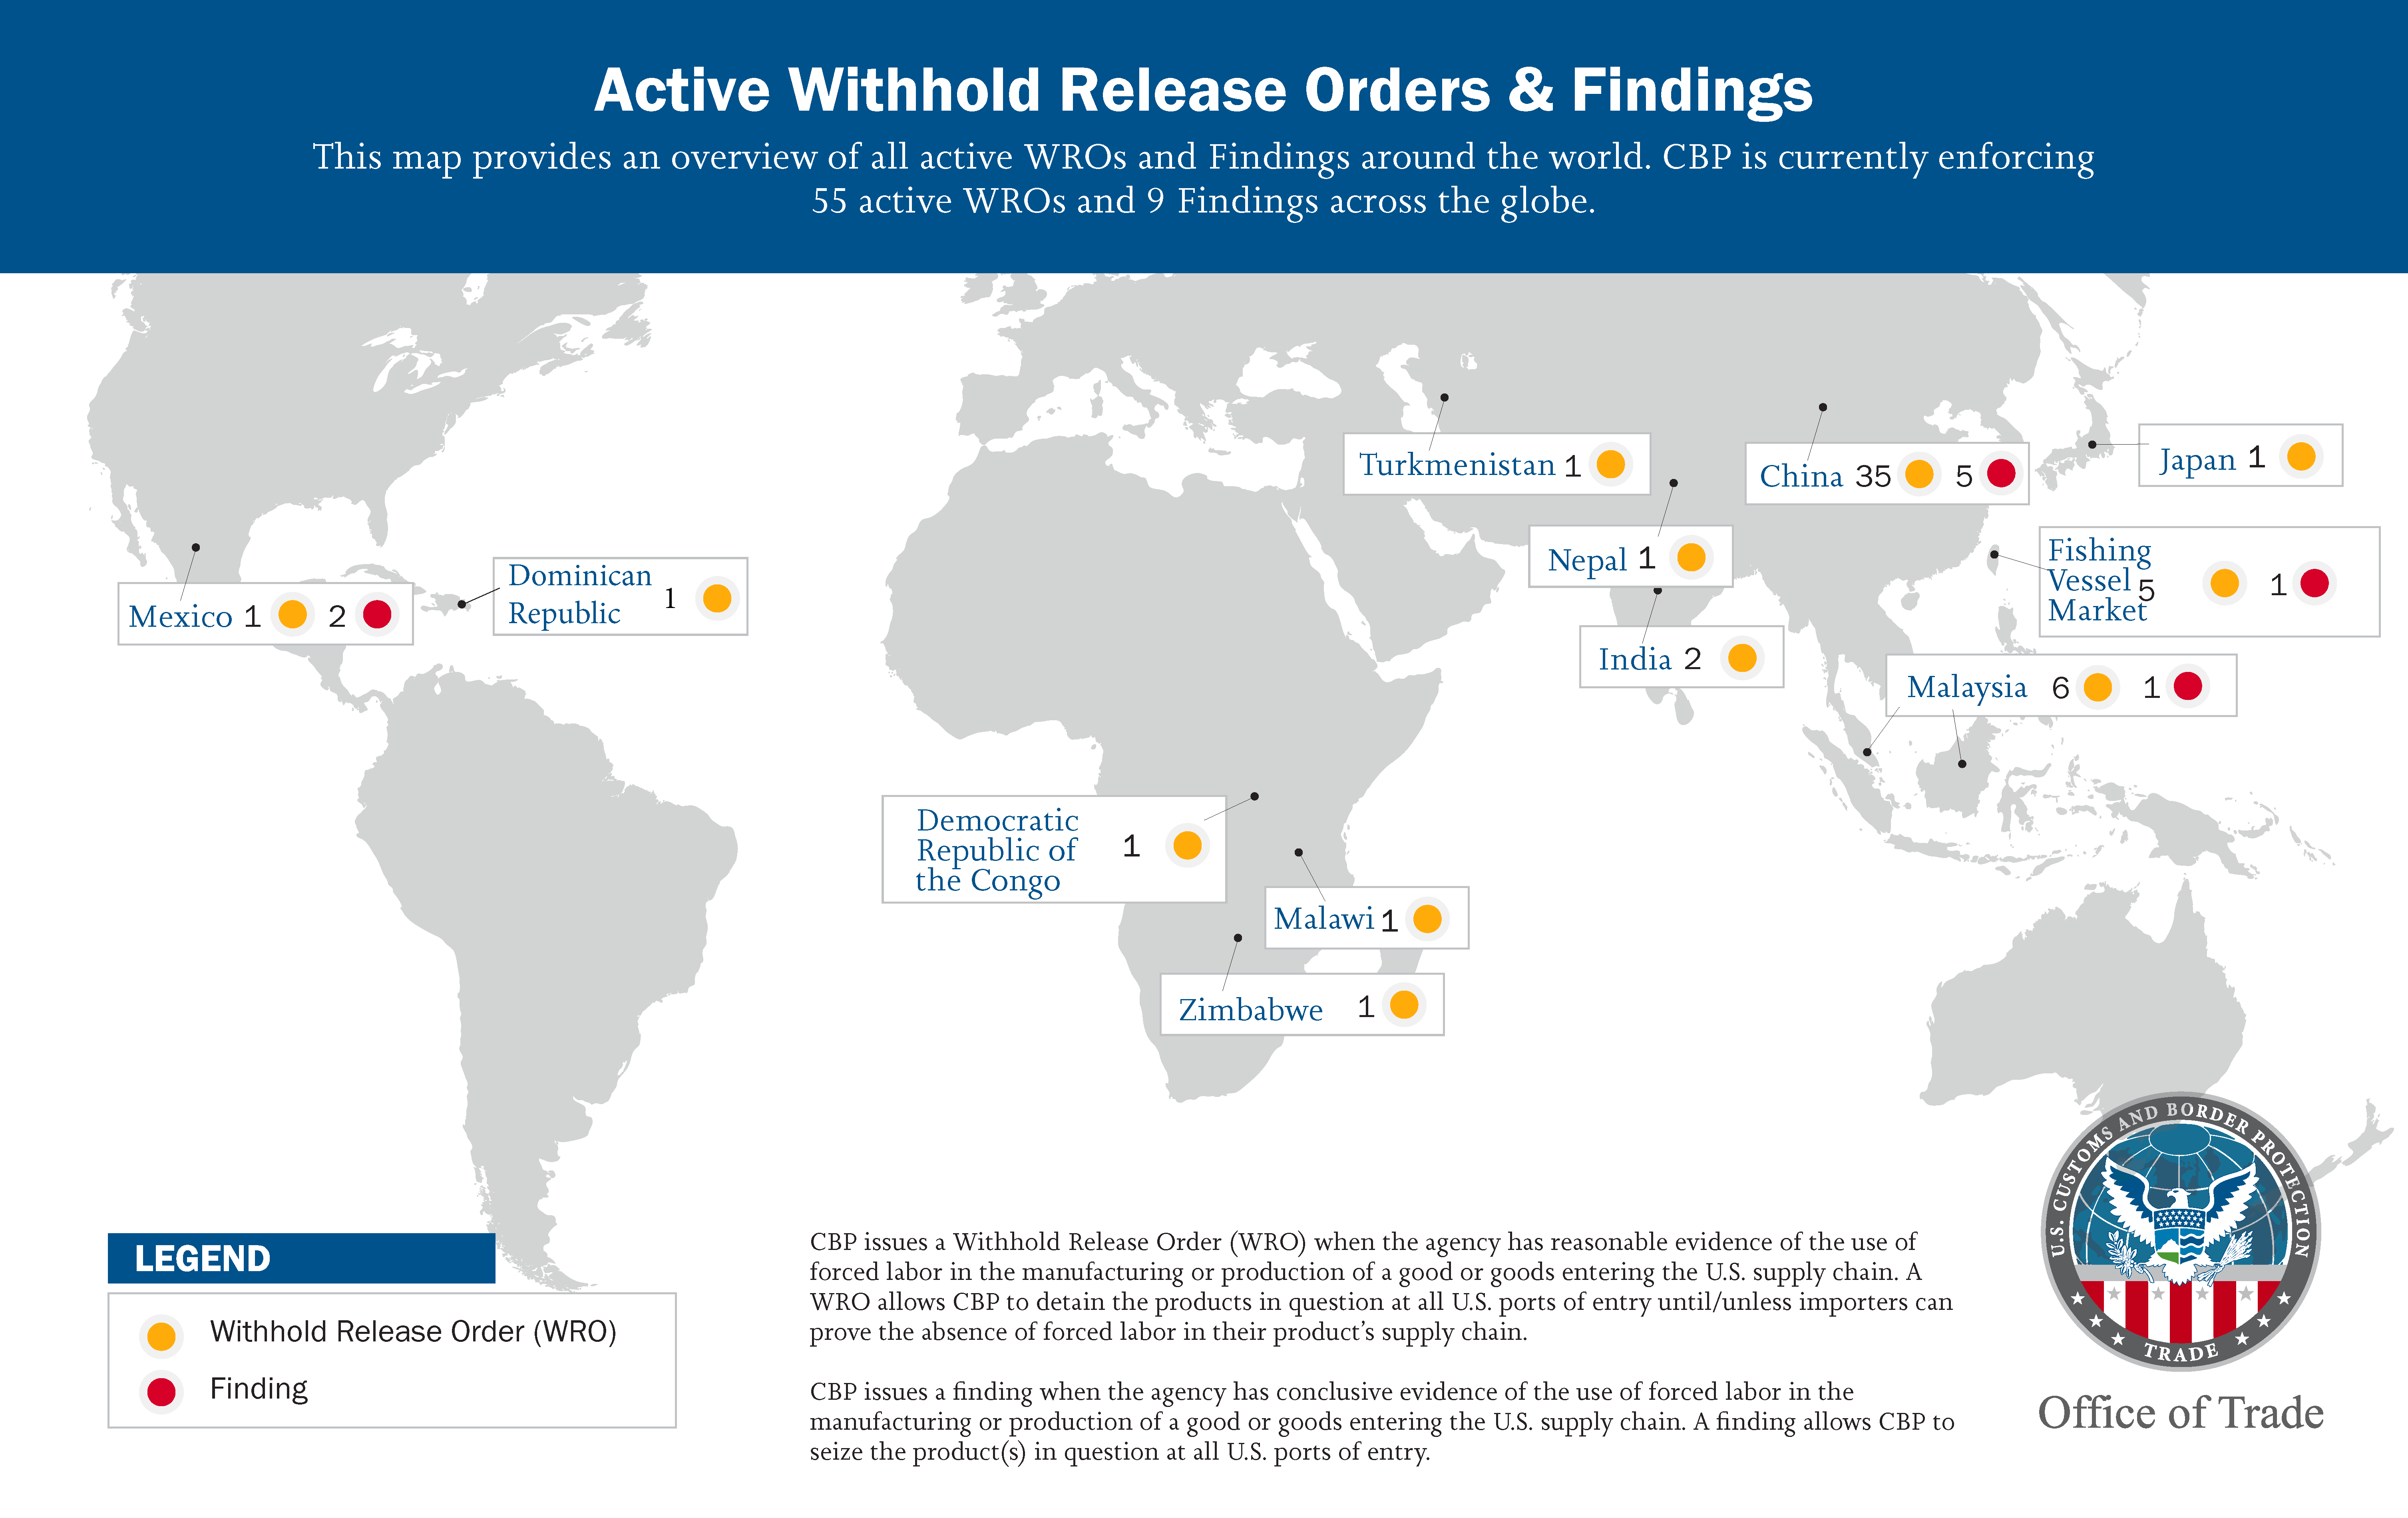 Active Withhold Release Orders & Findings. This map provides an overview of all active WROs and Findings around the world. CBP is currently enforcing 55 active WROs and 9 Findings across the globe. CBP issues a Withhold Release Order (WRO) when the agency has reasonable evidence of the use of forced labor in the manufacturing or production of a good or goods entering the U.S. supply chain. A WRO allows CBP to detain the products in question at all U.S. ports of entry until/unless importers can prove the abs